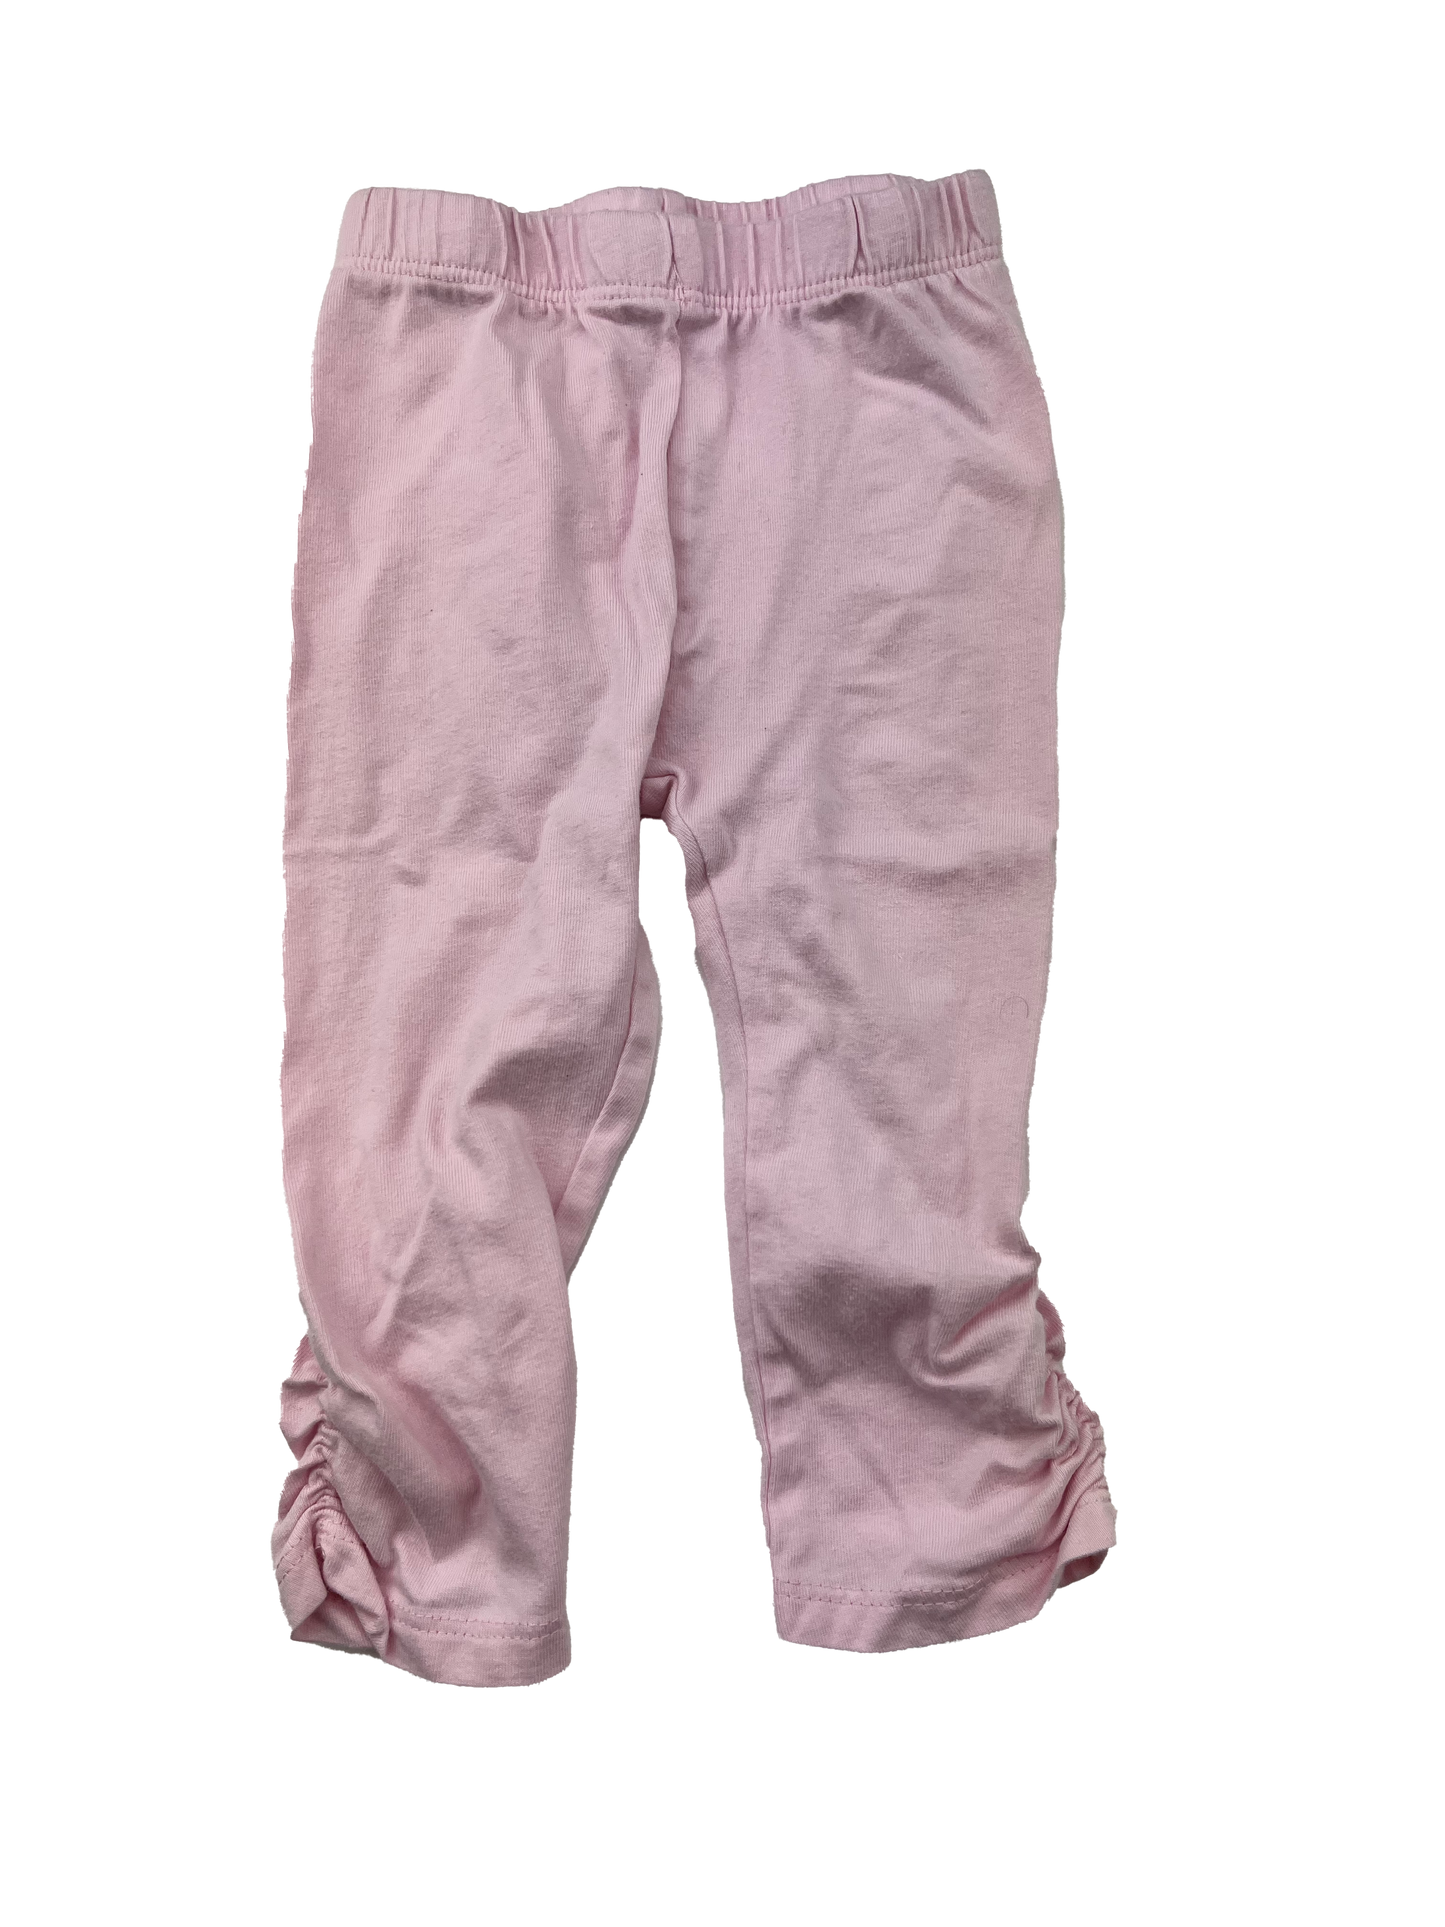 Children's Place Pink Legging with 6-9M